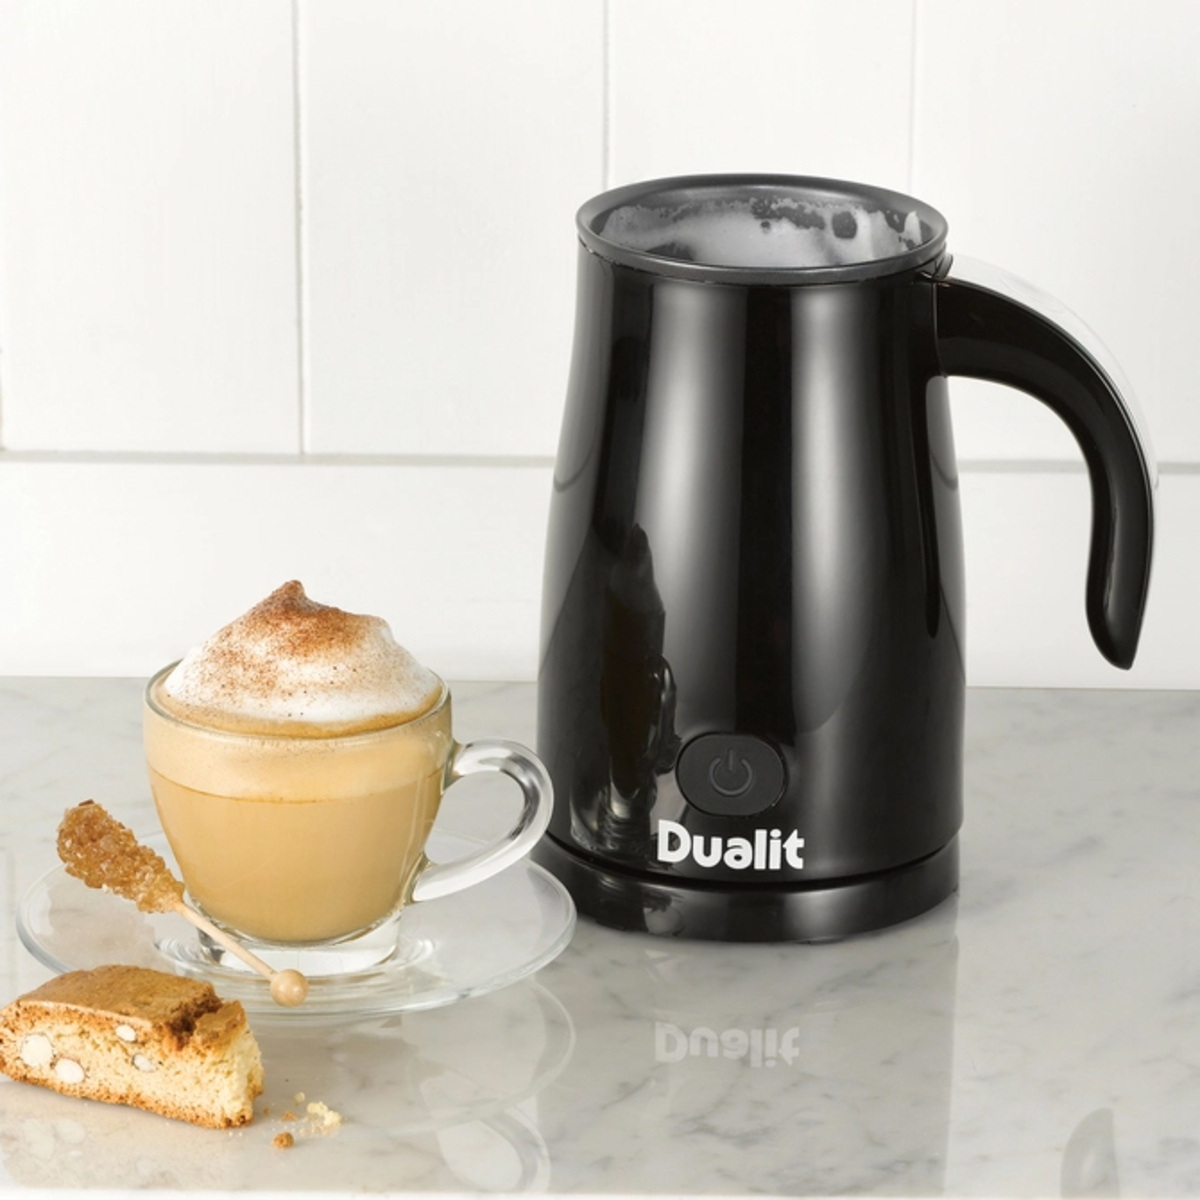 Photos - Coffee Maker Dualit 84135 Cordless 320ml Milk Frother, Black 